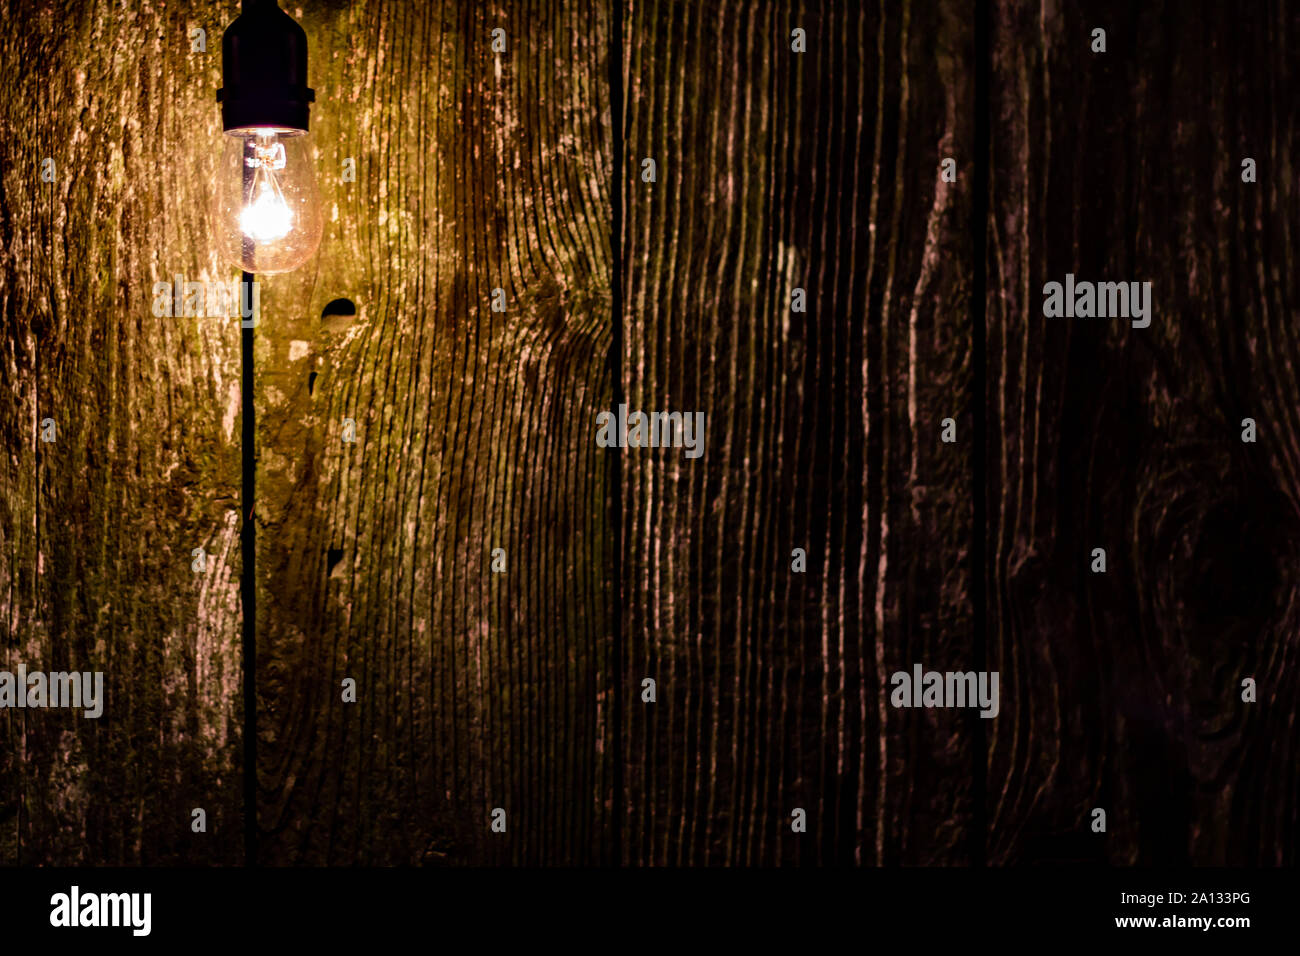 Light bulb against an old plank fence at night with room to the right for text Stock Photo